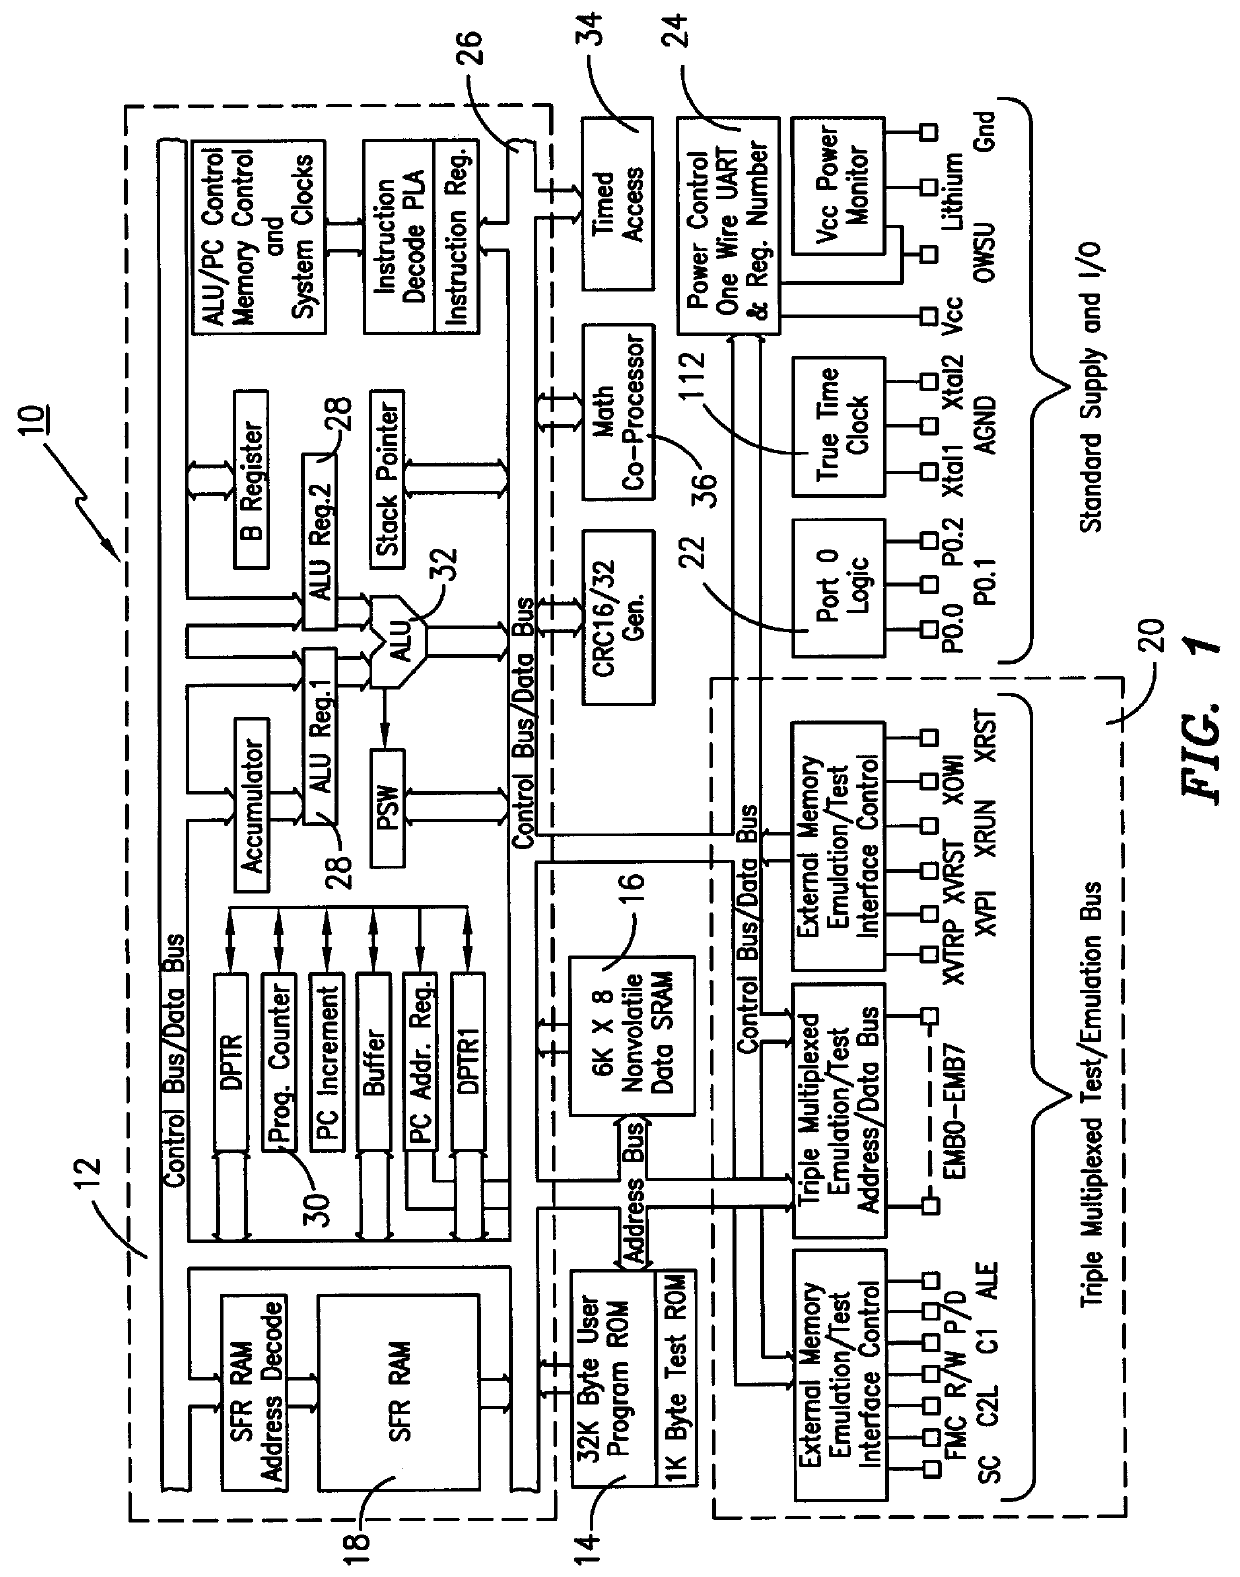 Method and apparatus for masking modulo exponentiation calculations in an integrated circuit